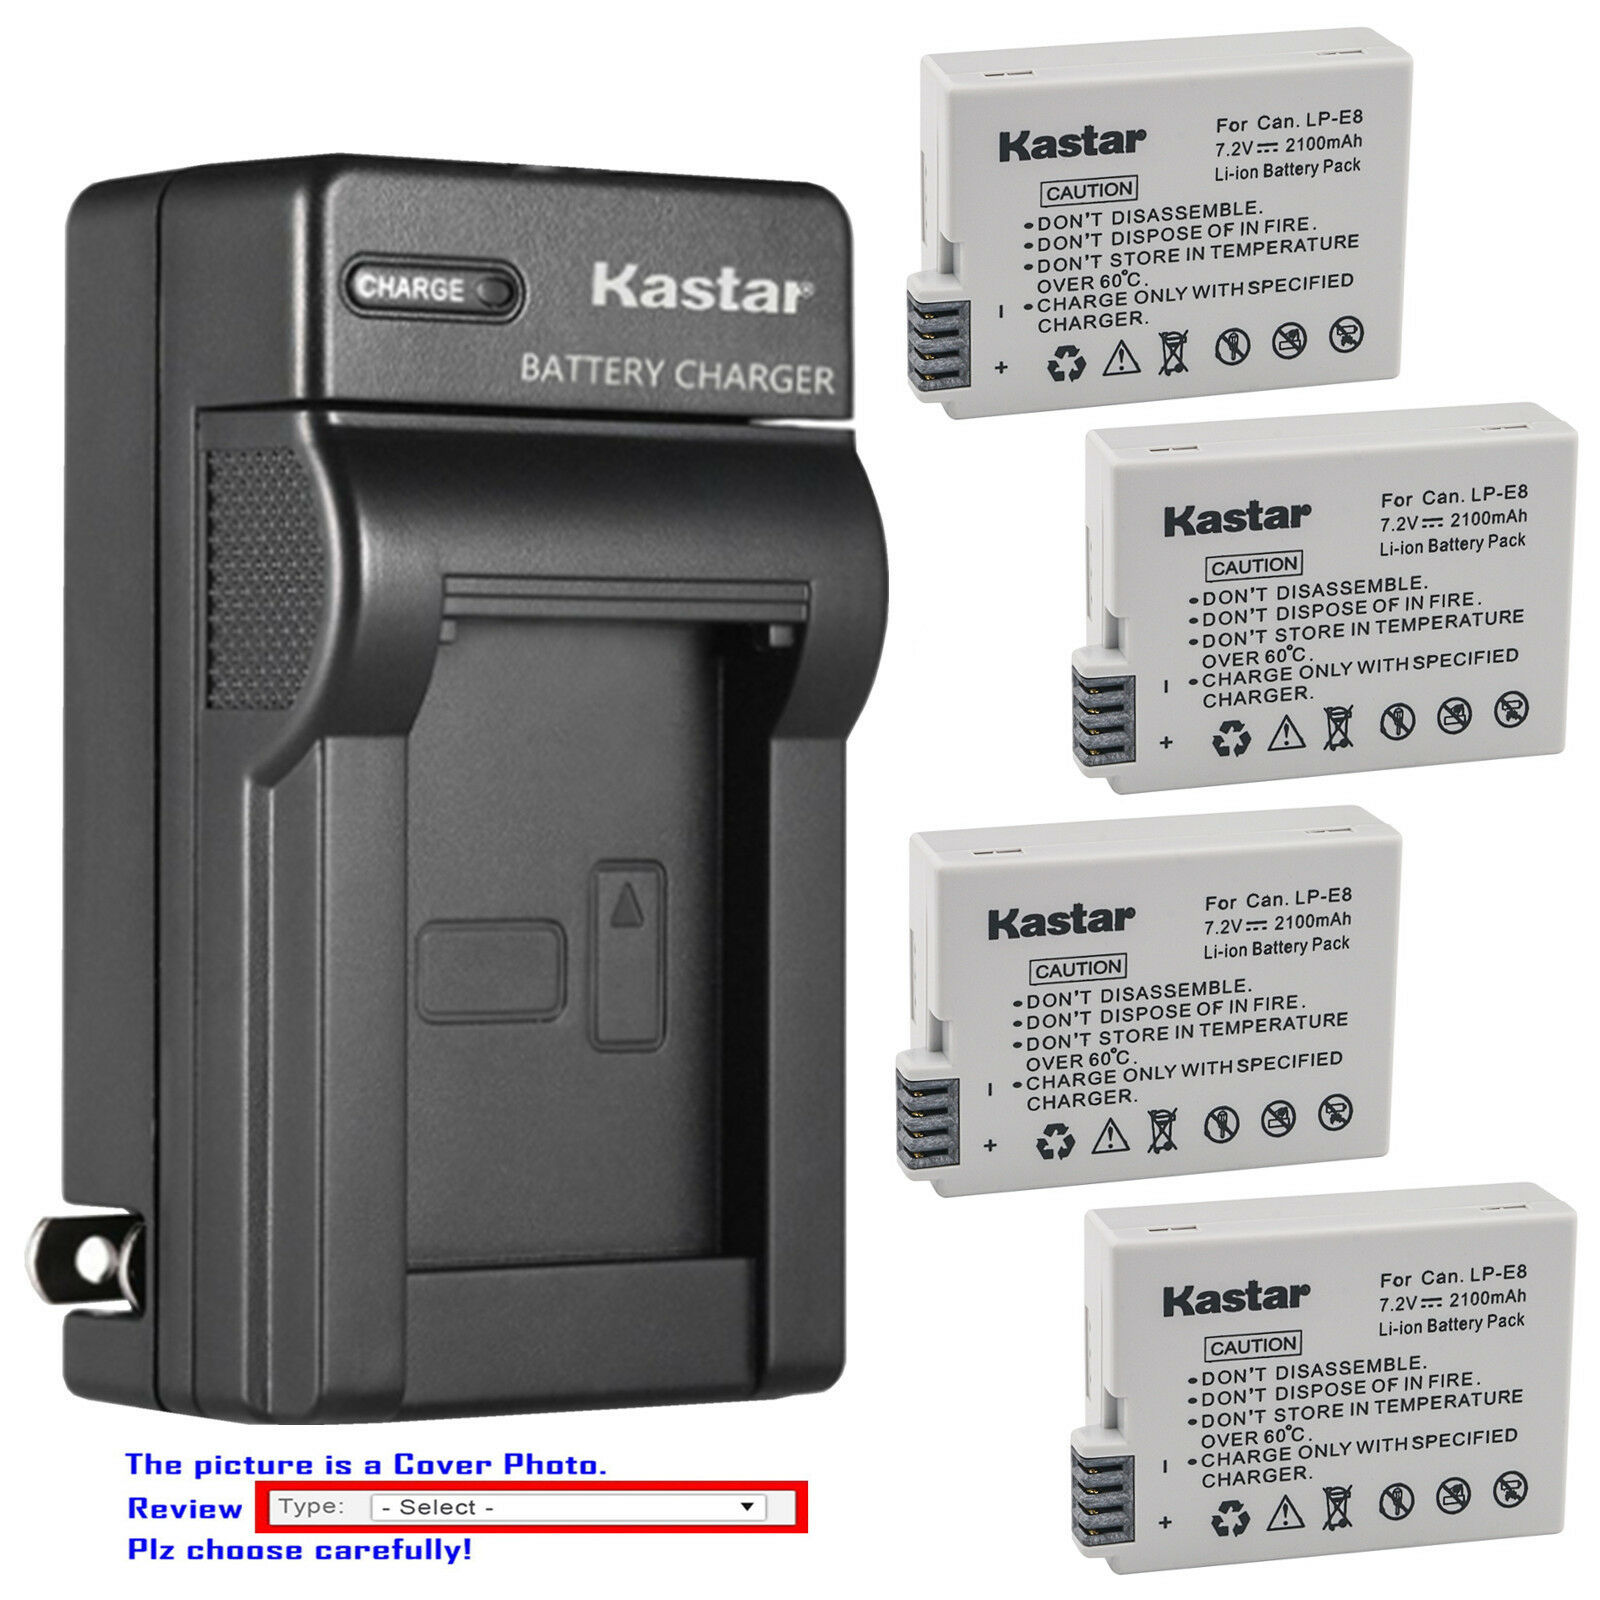 Kastar Battery Wall Usb Charger For Canon Lp-e8 Lc-e8 Canon Eos Rebel T3i Camera